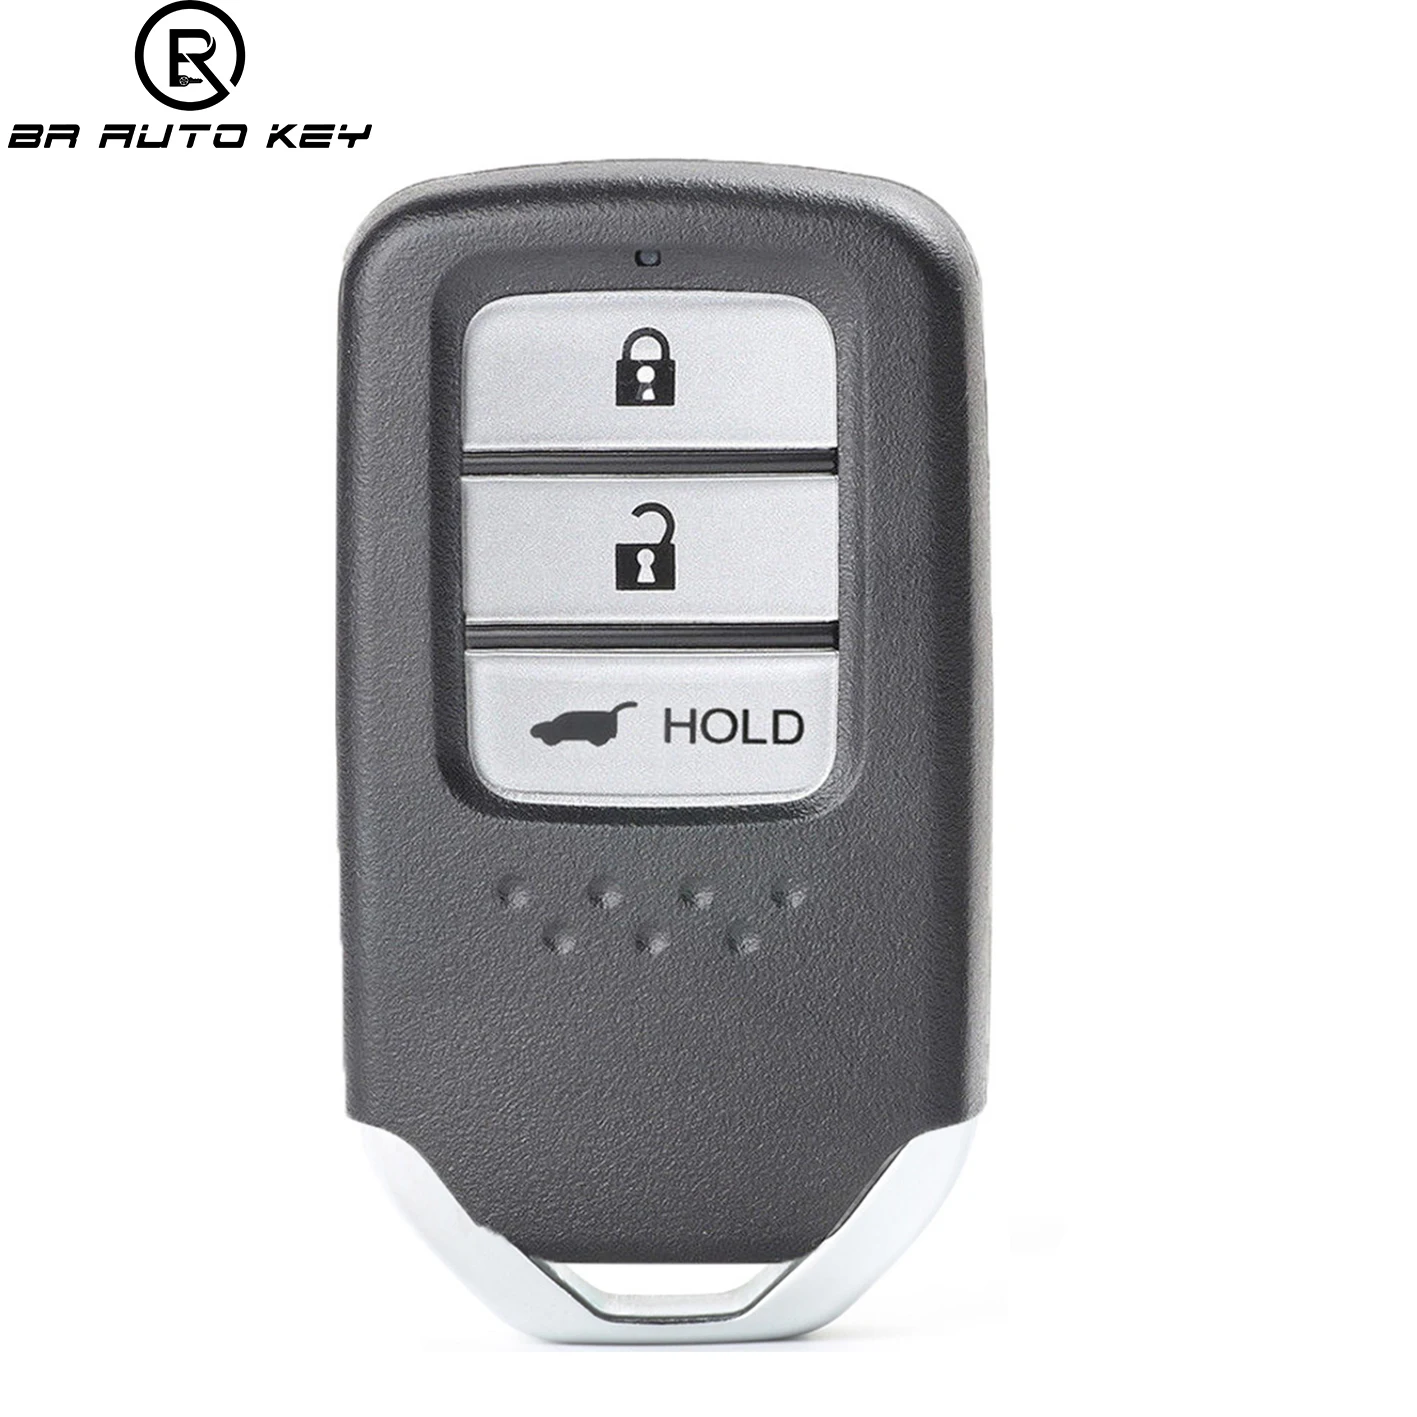 Keyless Go Smart Remote Car key Fob For Honda C-RV 2017 2018 2019 433mhz id47 Chip With Trunk Hold Buttons 72147-TLA